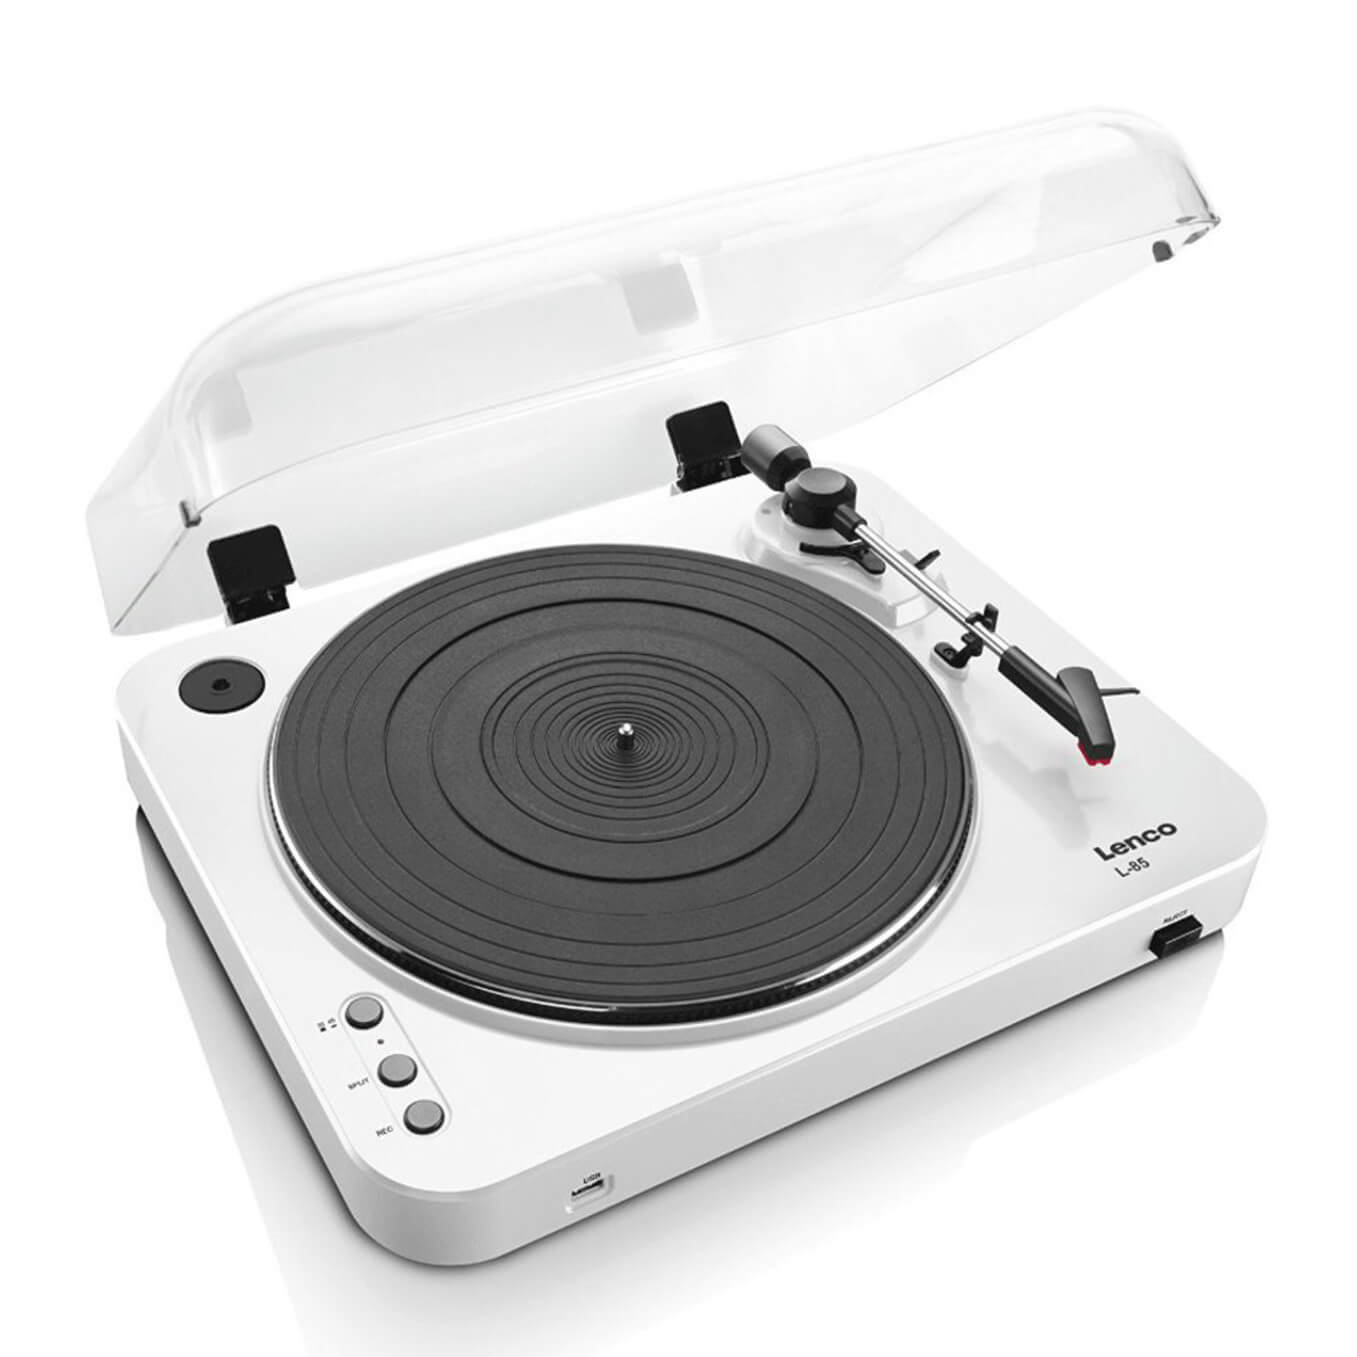 Lenco L-85 Turntable with USB Direct Recording - White